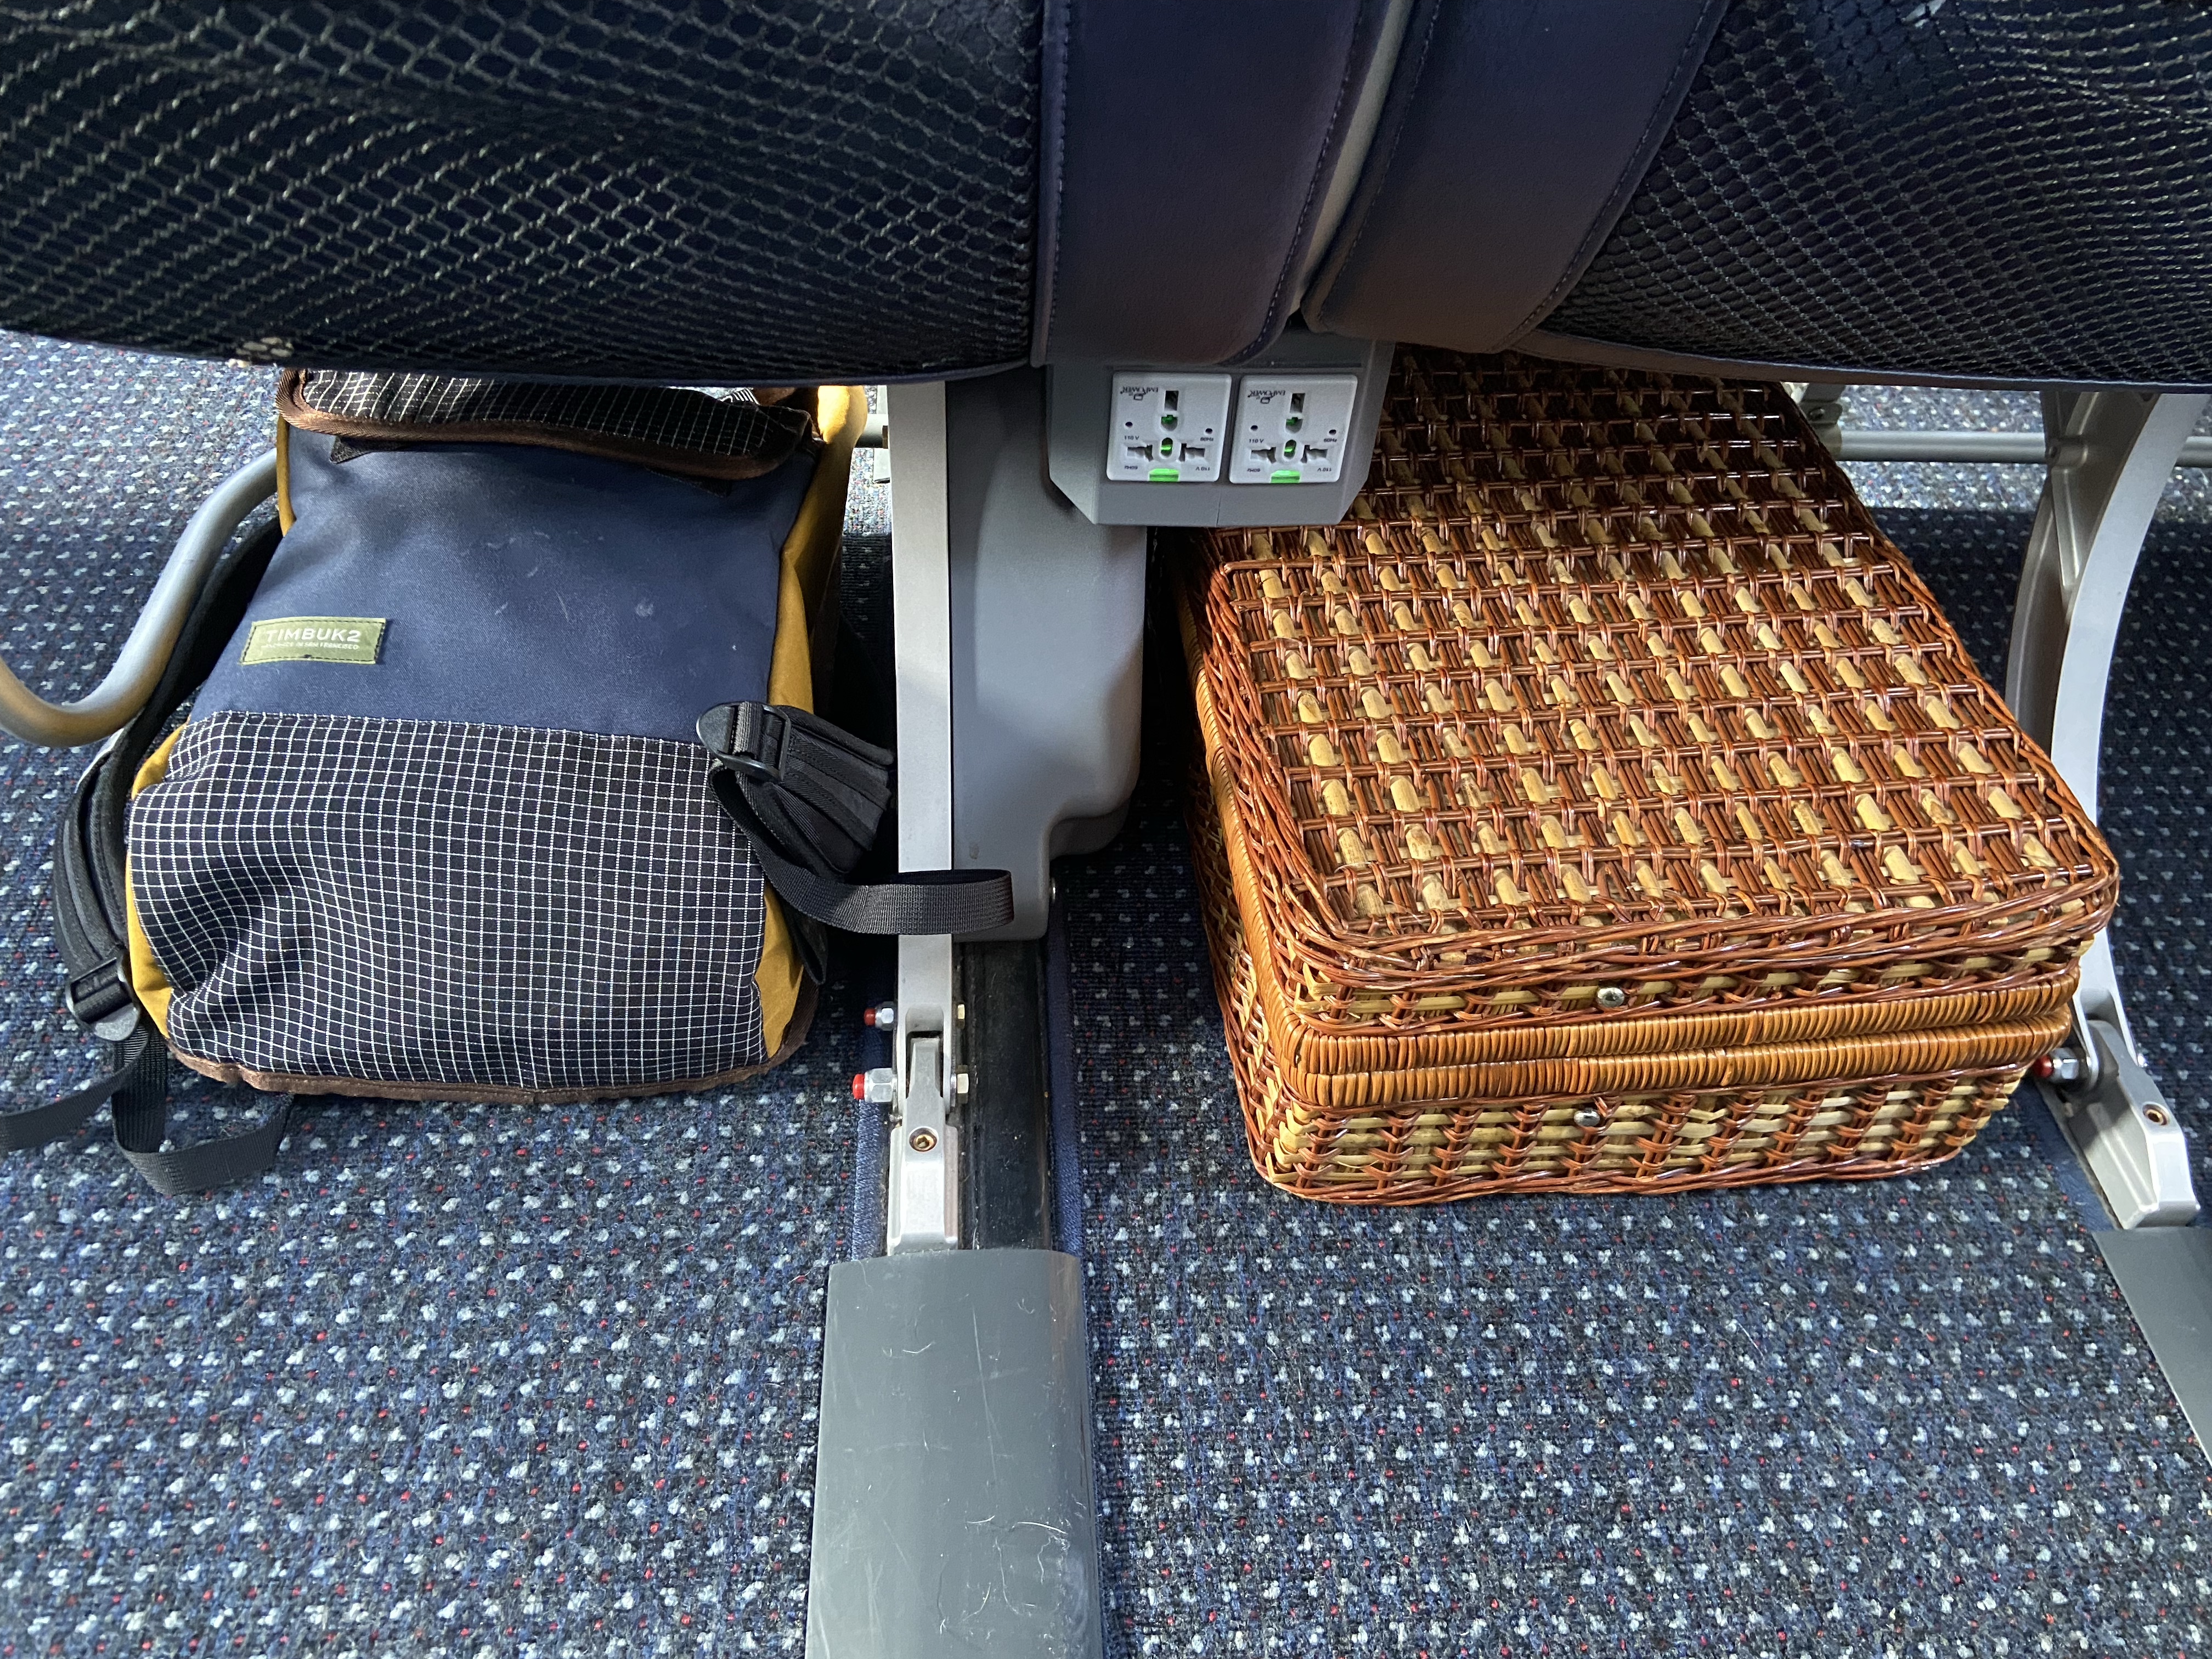 Timbuk2 Mini Prospect backpack & a wicker suitcase stowed under an airplane seat